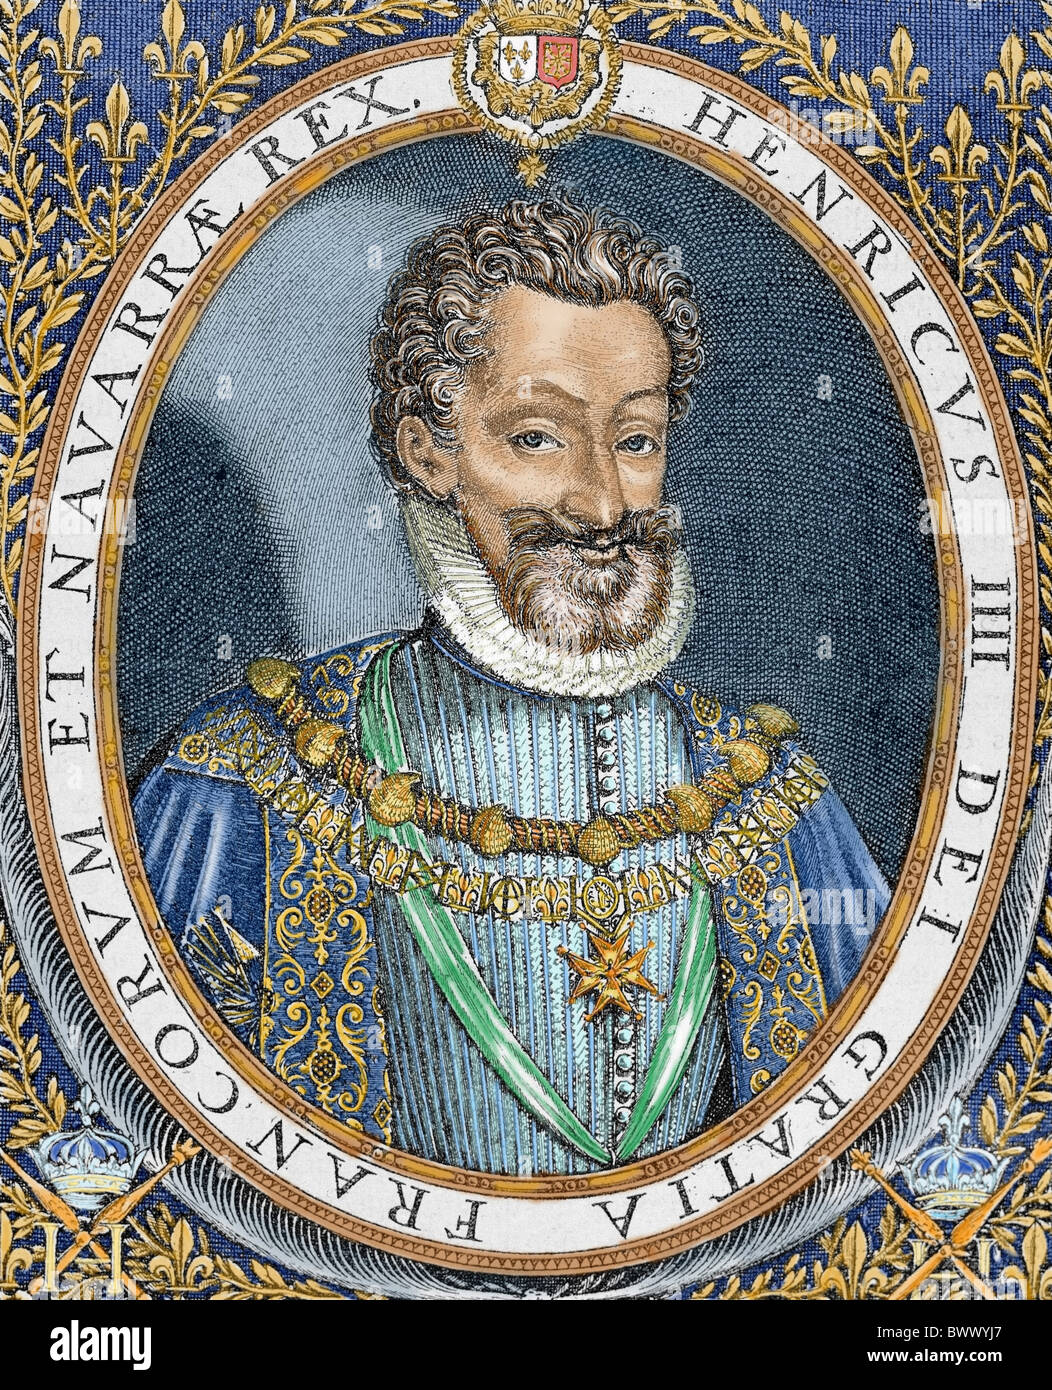 Henry IV of France 'The Great' (1553-1610). King of Navarre in 1562 (Henry III), king of France in 1589-1610. Stock Photo